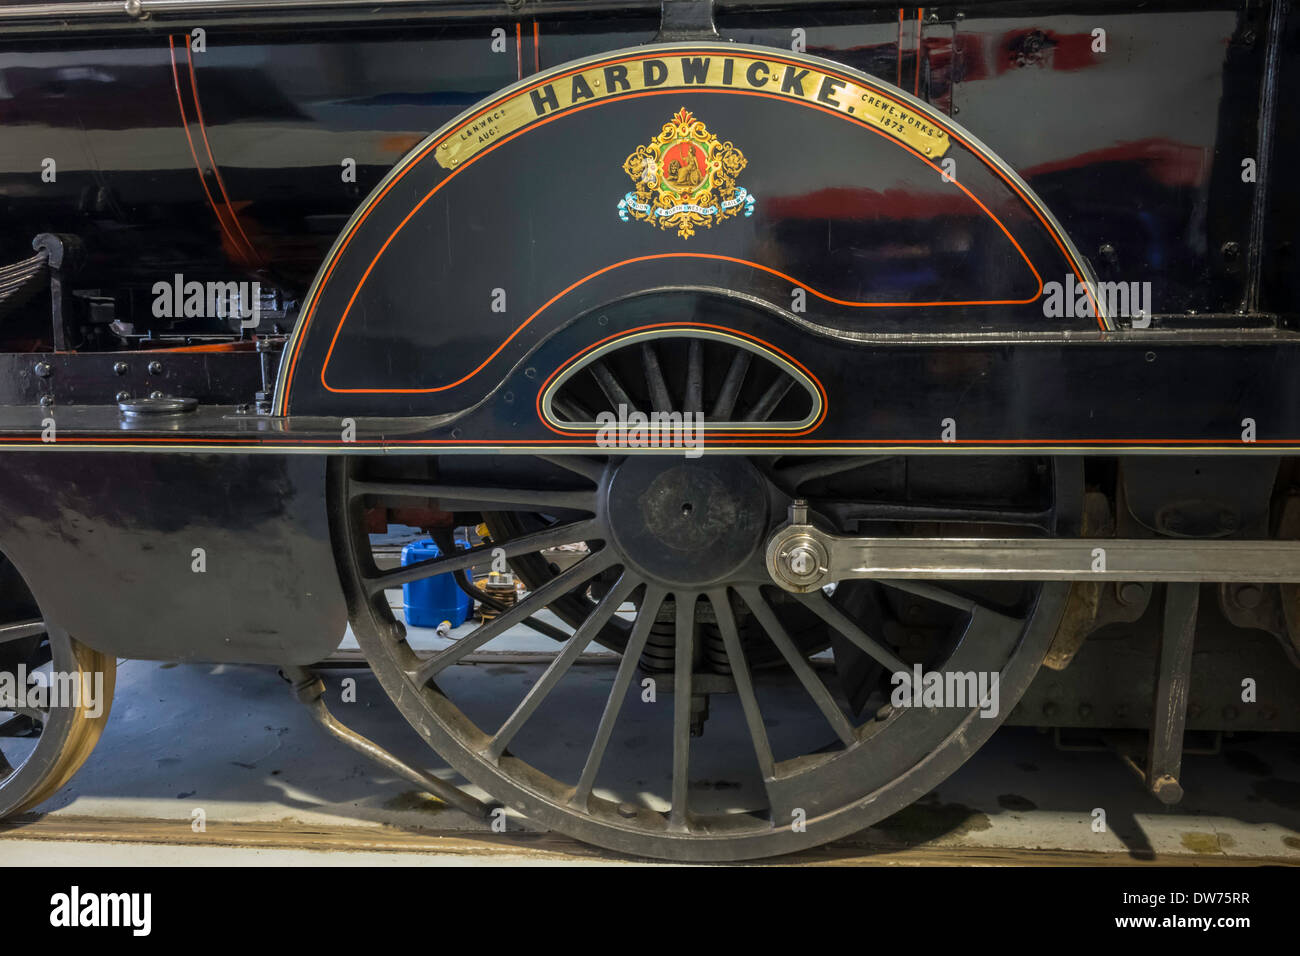 London North Western Railway No. 790 2-4-0 express passenger locomotive built Crewe 1873 on display in the Museum at Shildon Stock Photo